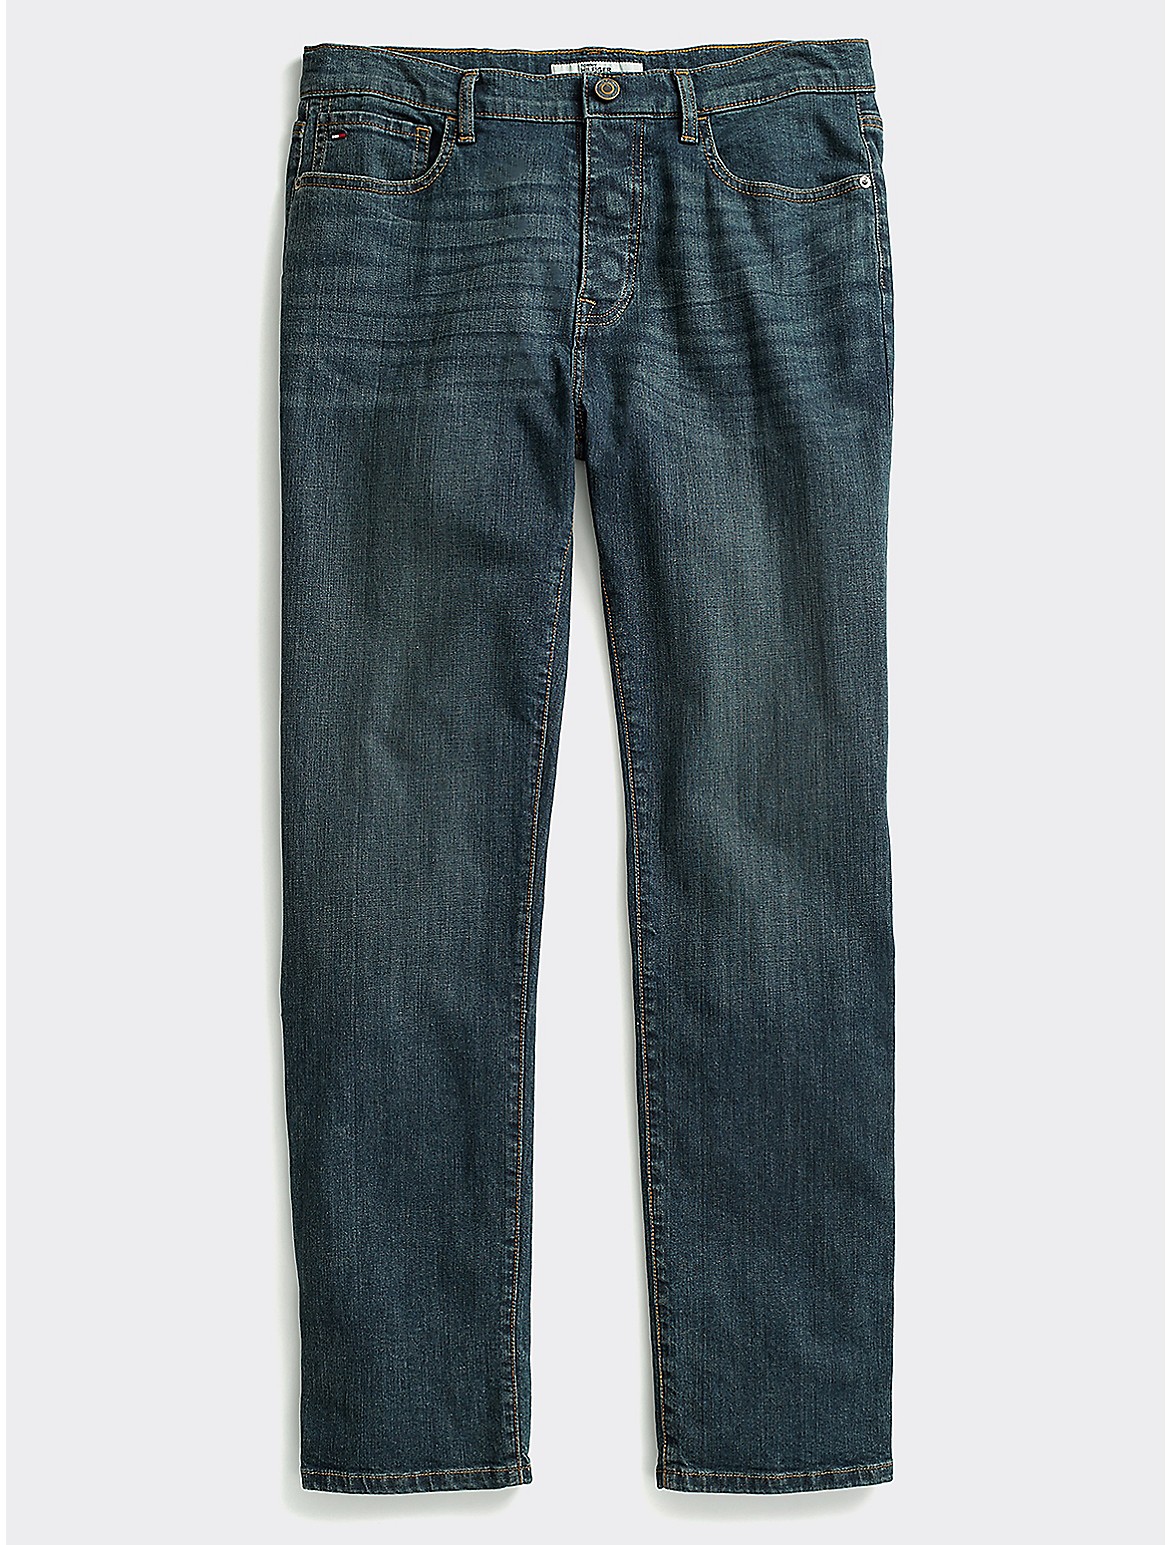 Tommy Hilfiger Men's Relaxed Fit Jean